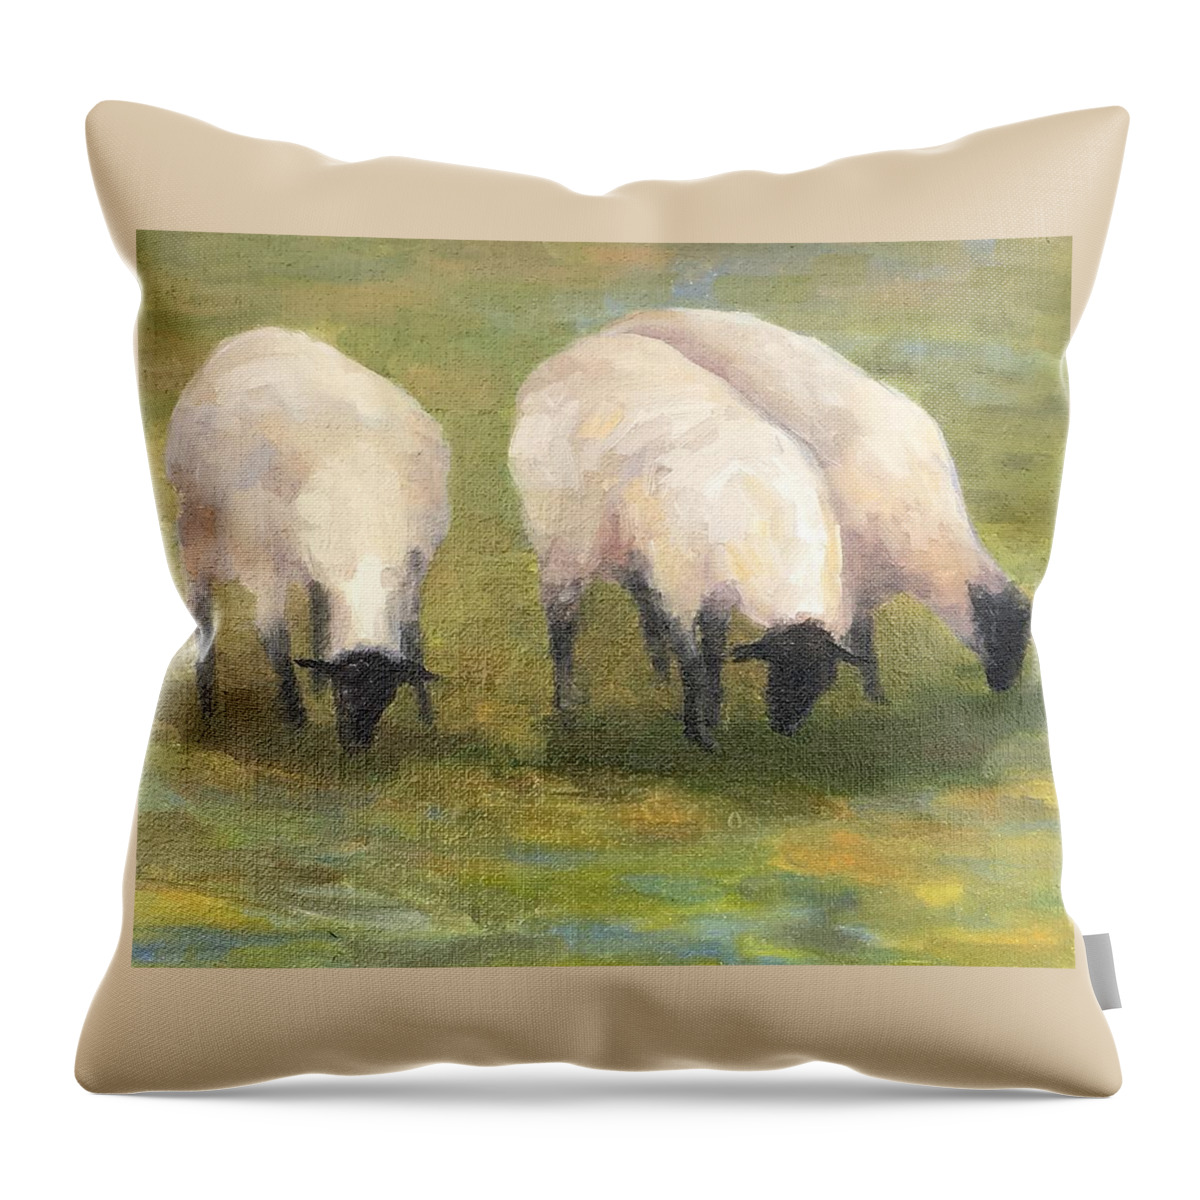 Sheep Throw Pillow featuring the painting Baa-baa by Barrett Edwards